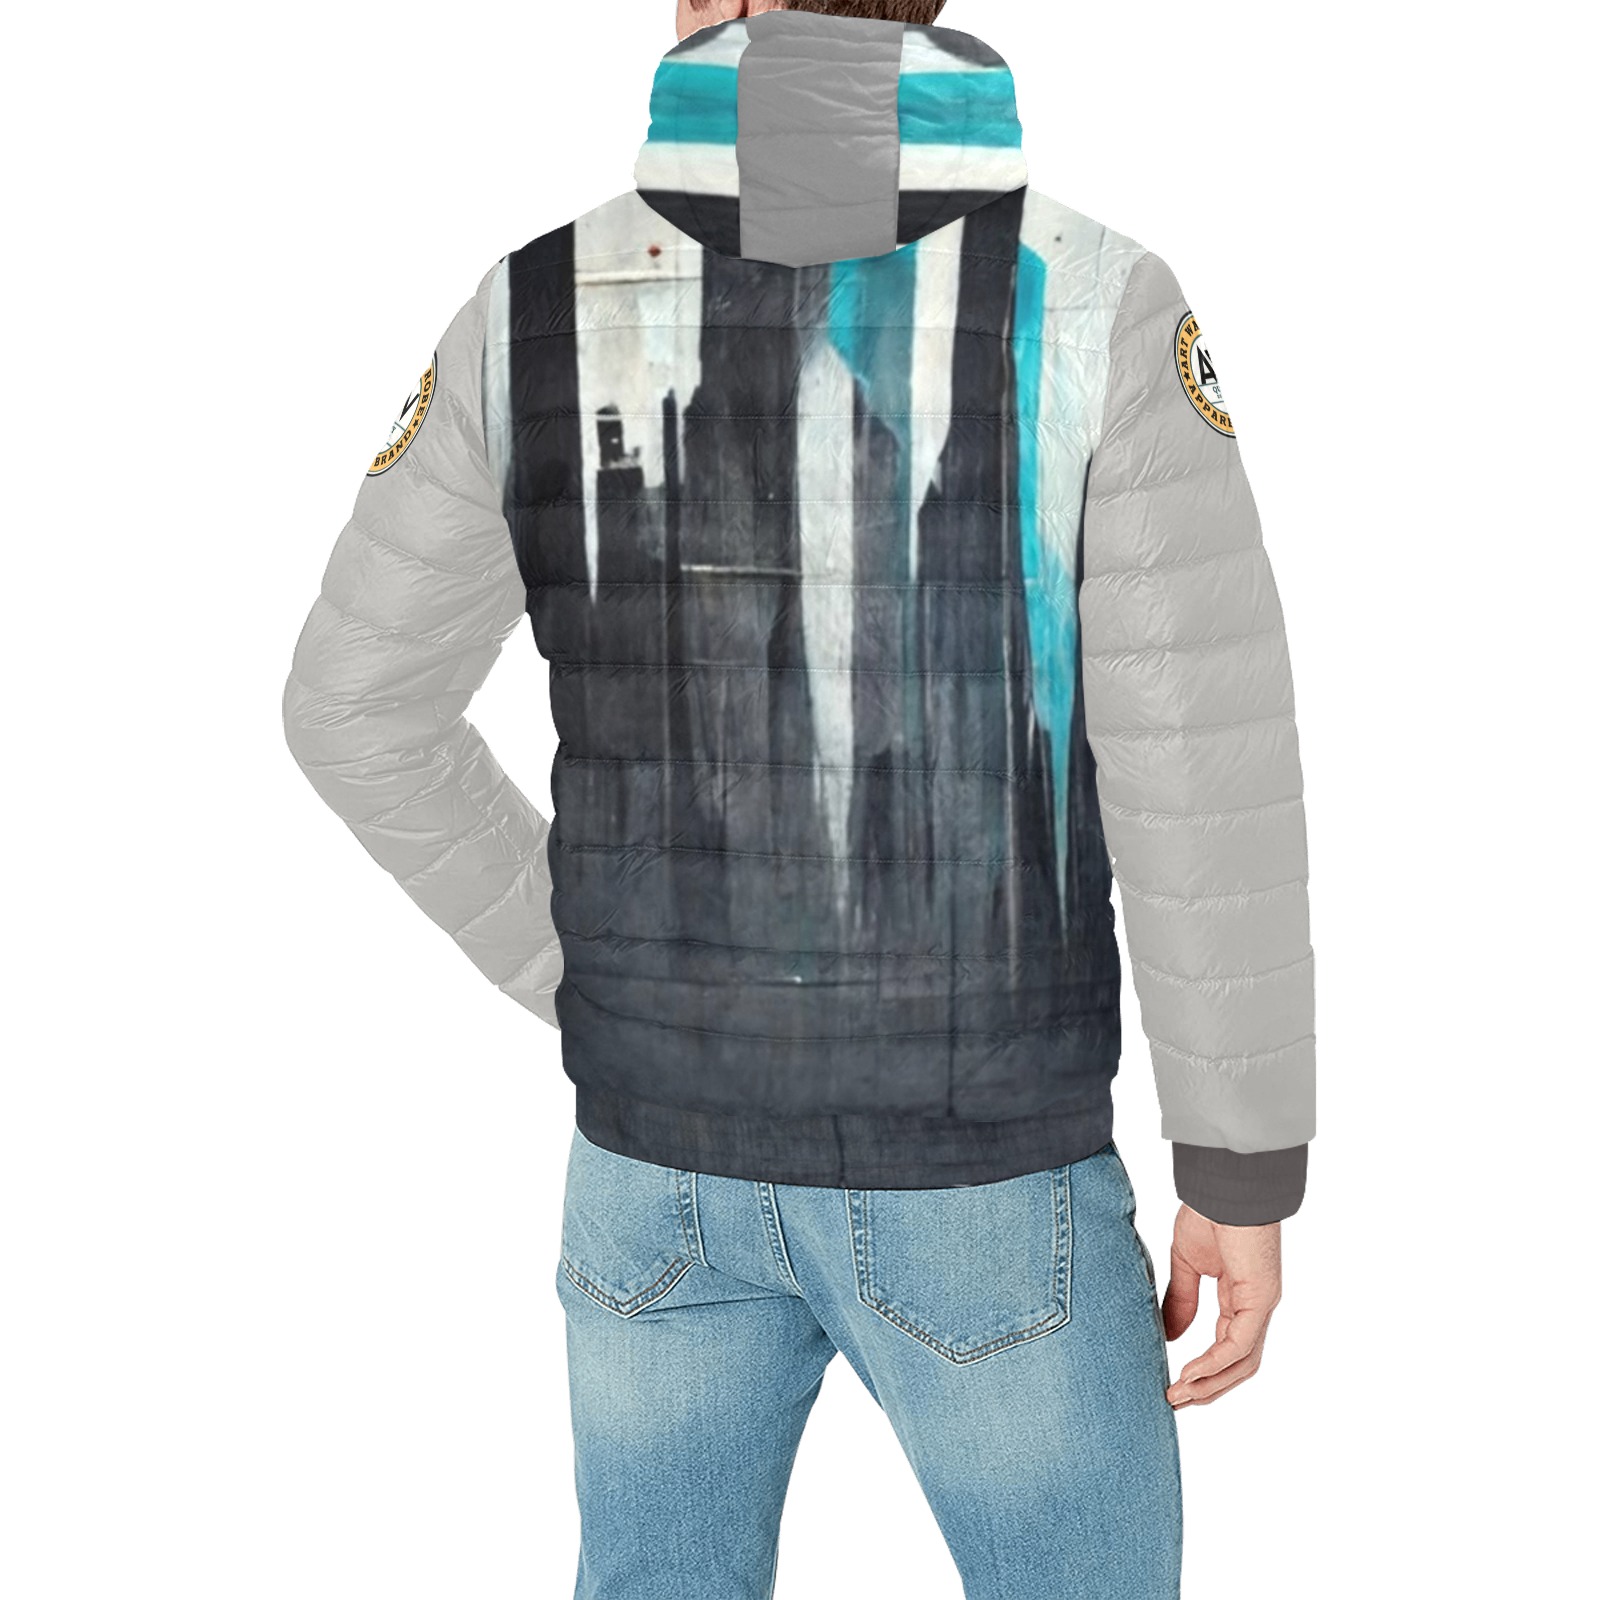 graffiti building's turquoise and black Men's Padded Hooded Jacket (Model H42)